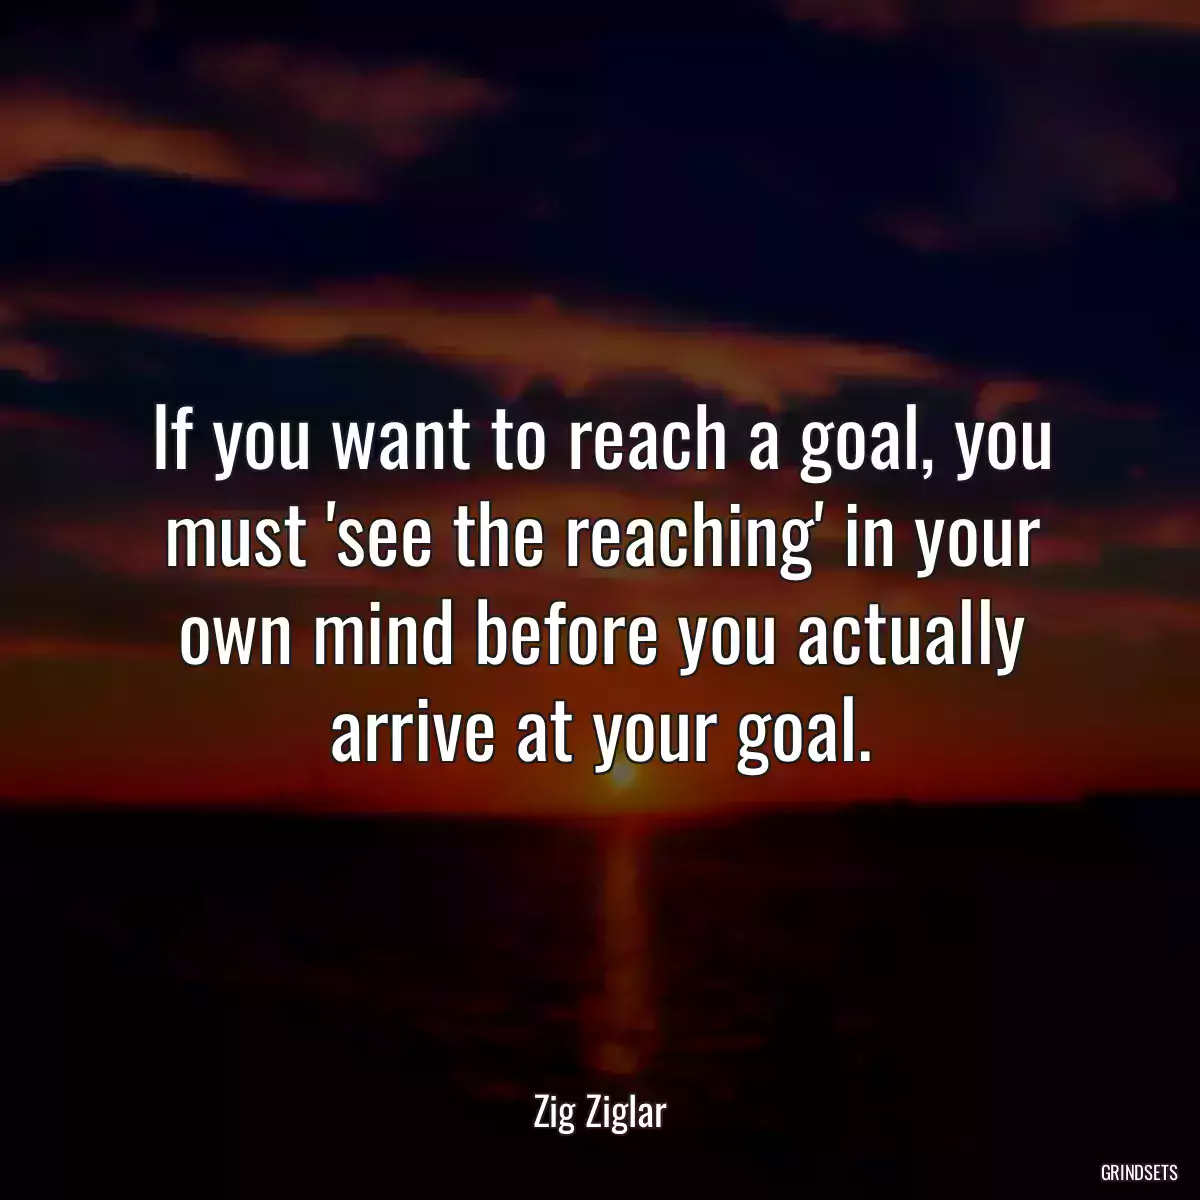 If you want to reach a goal, you must \'see the reaching\' in your own mind before you actually arrive at your goal.